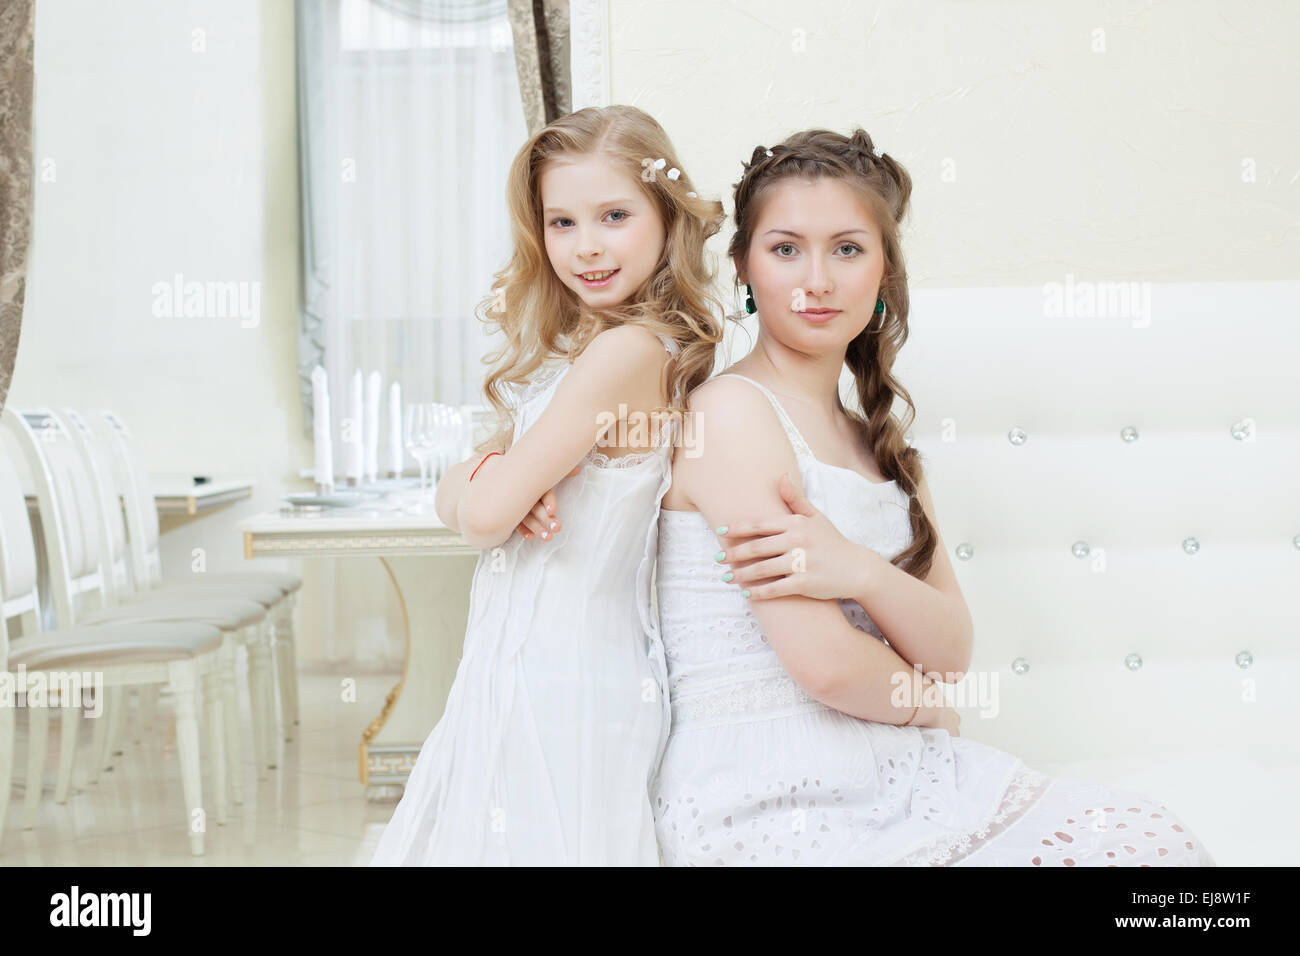 Lovely young models posing in restaurant Stock Photo - Alamy